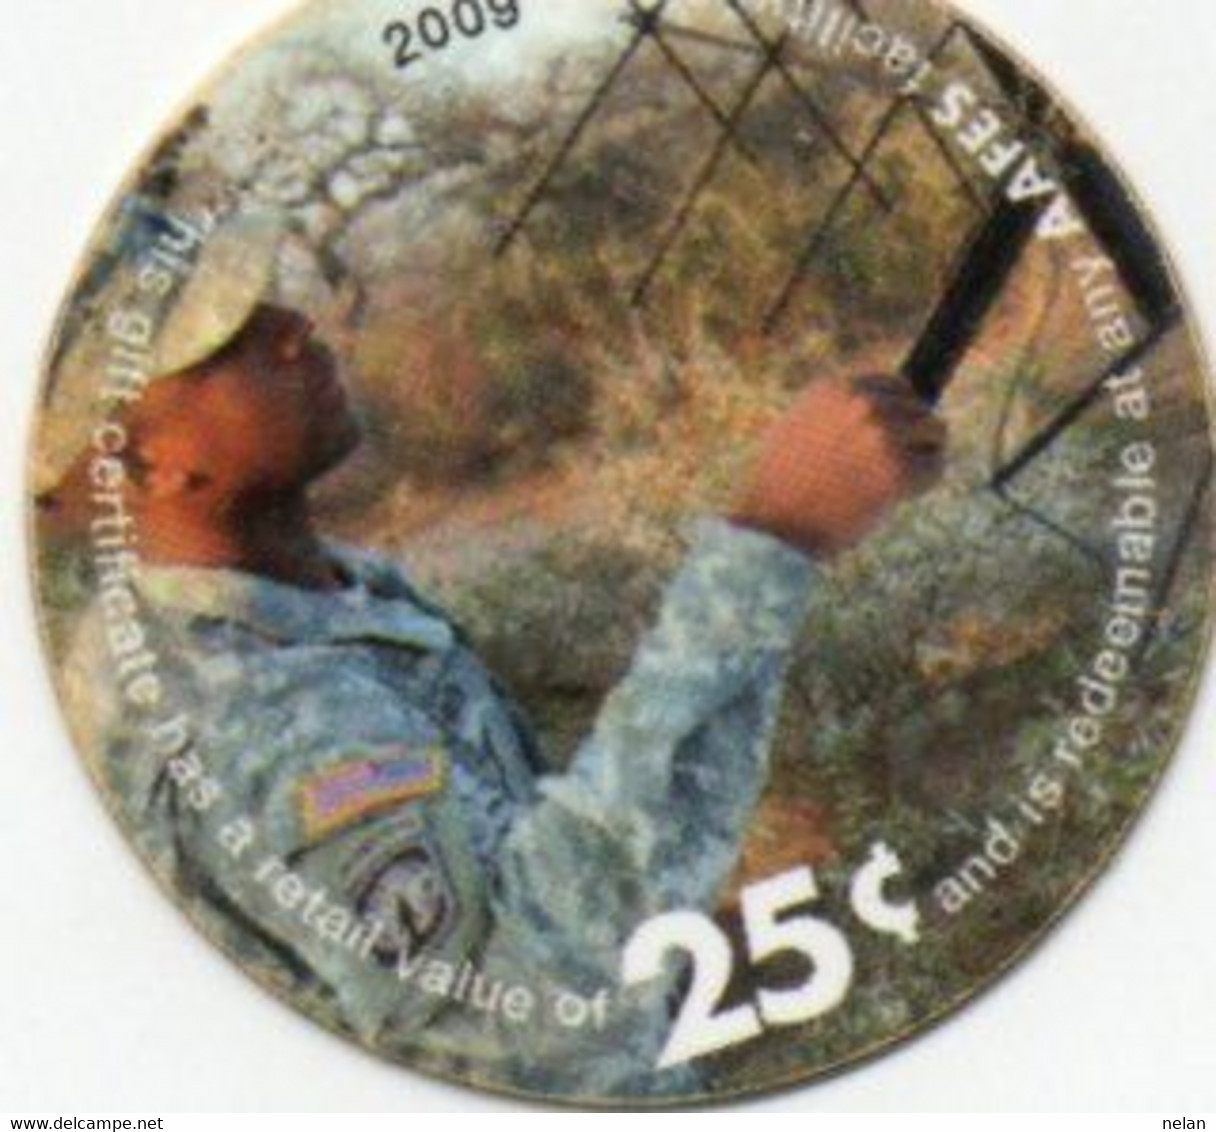 Stati Uniti D'America - 25 Cents - 2009  -Military Payment AAFES Certificates Series 13th Issue -Wor:P-M516 - Plastic - Serie 701